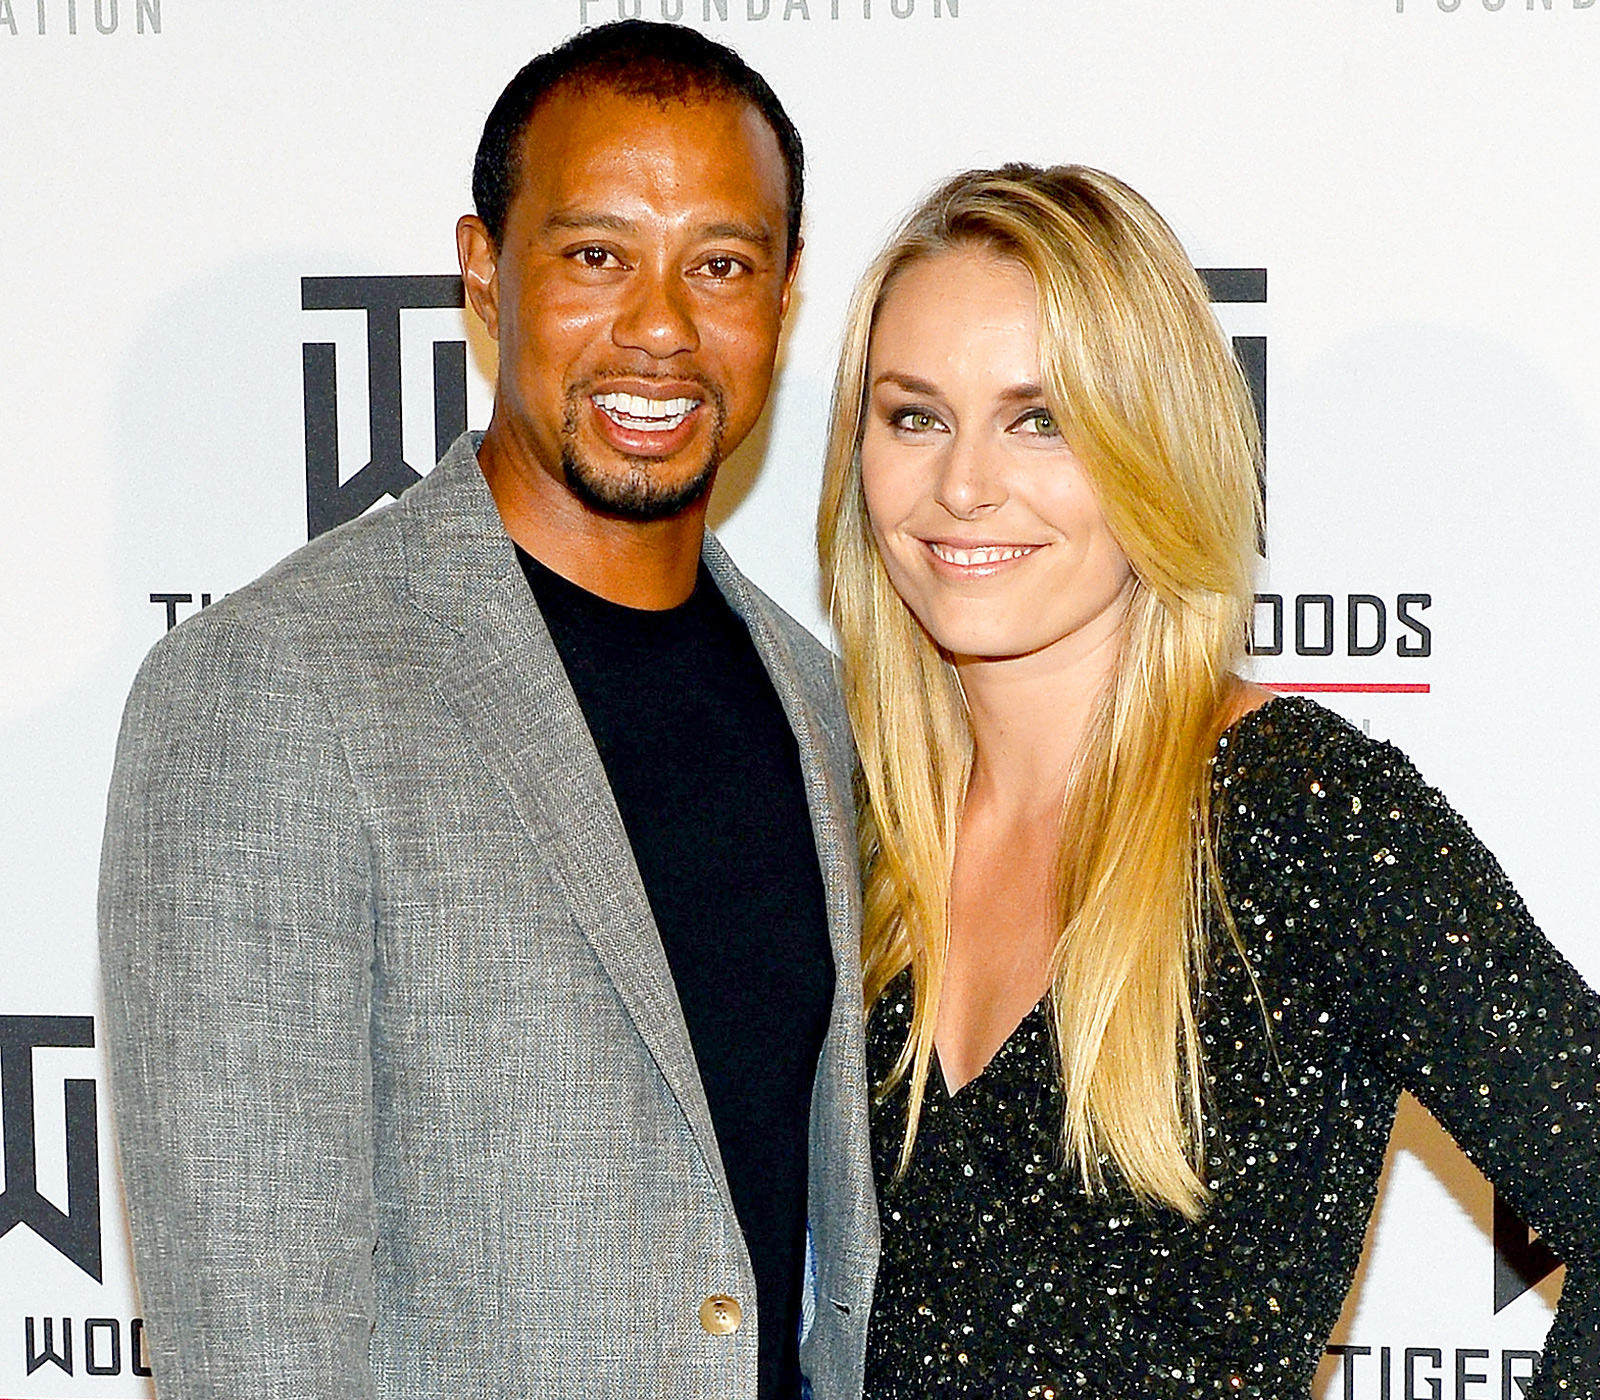 Lindsey Vonn Nude Girl Porn - Lindsey Vonn Responds to Leaked Nude Photos of Her and Tiger Woods